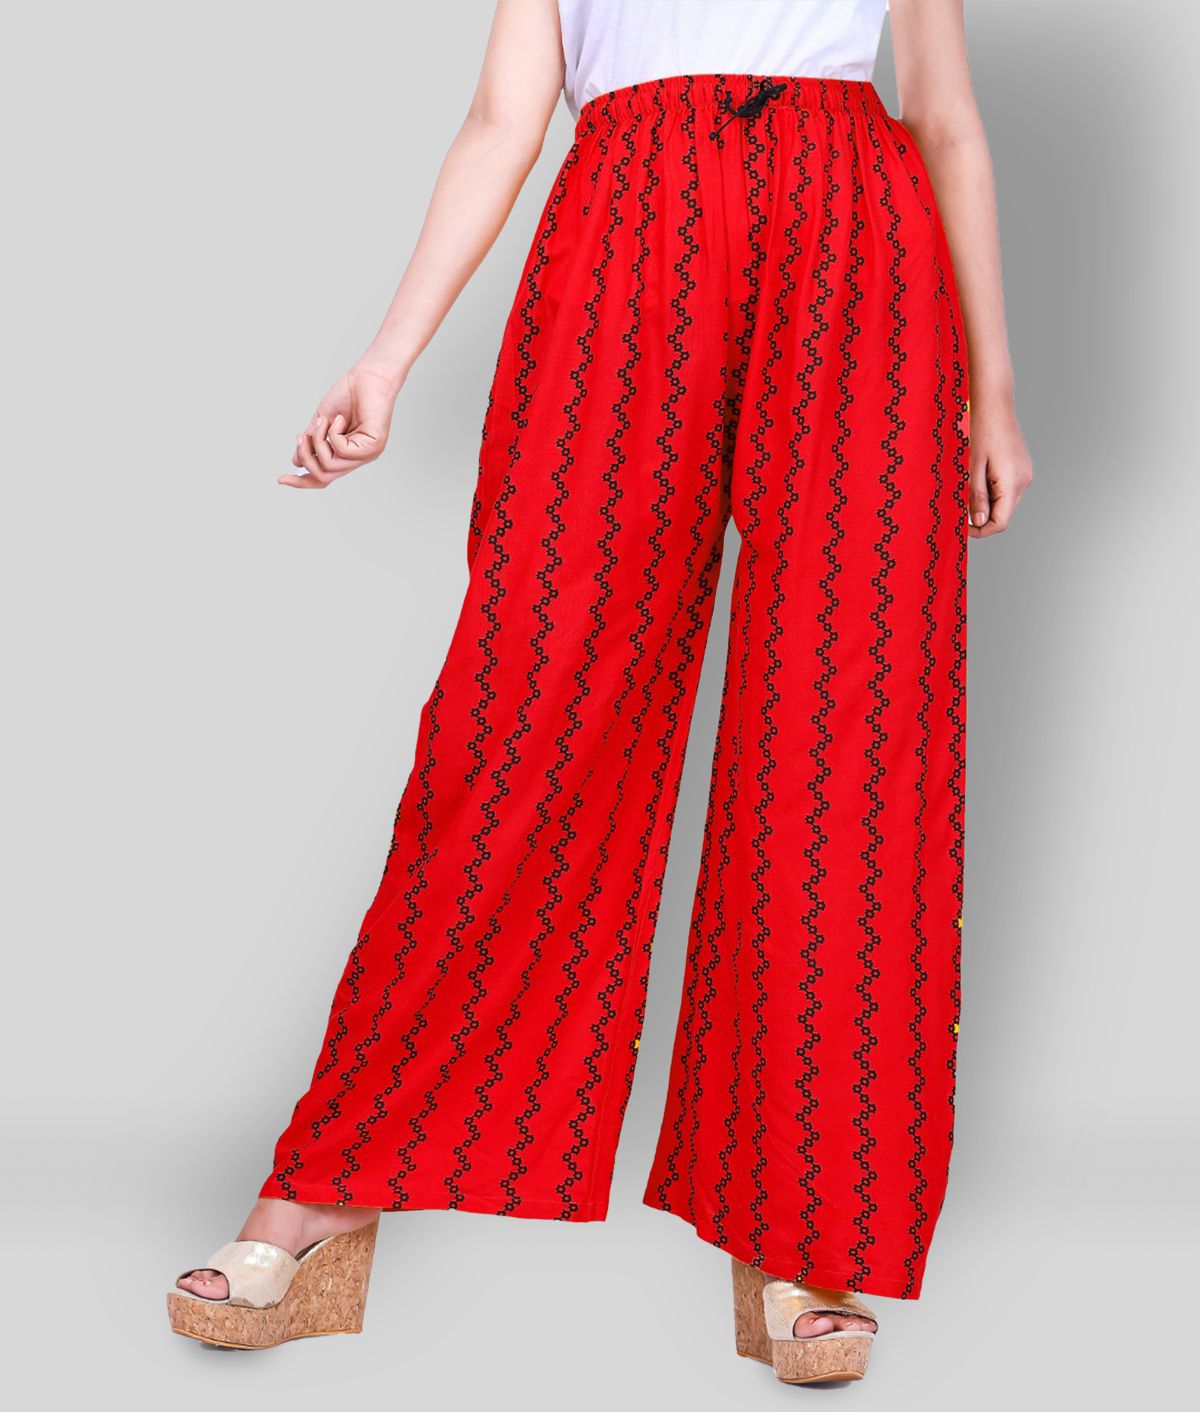     			NISA ART FASHION - Red Rayon Flared Women's Palazzos ( Pack of 1 )